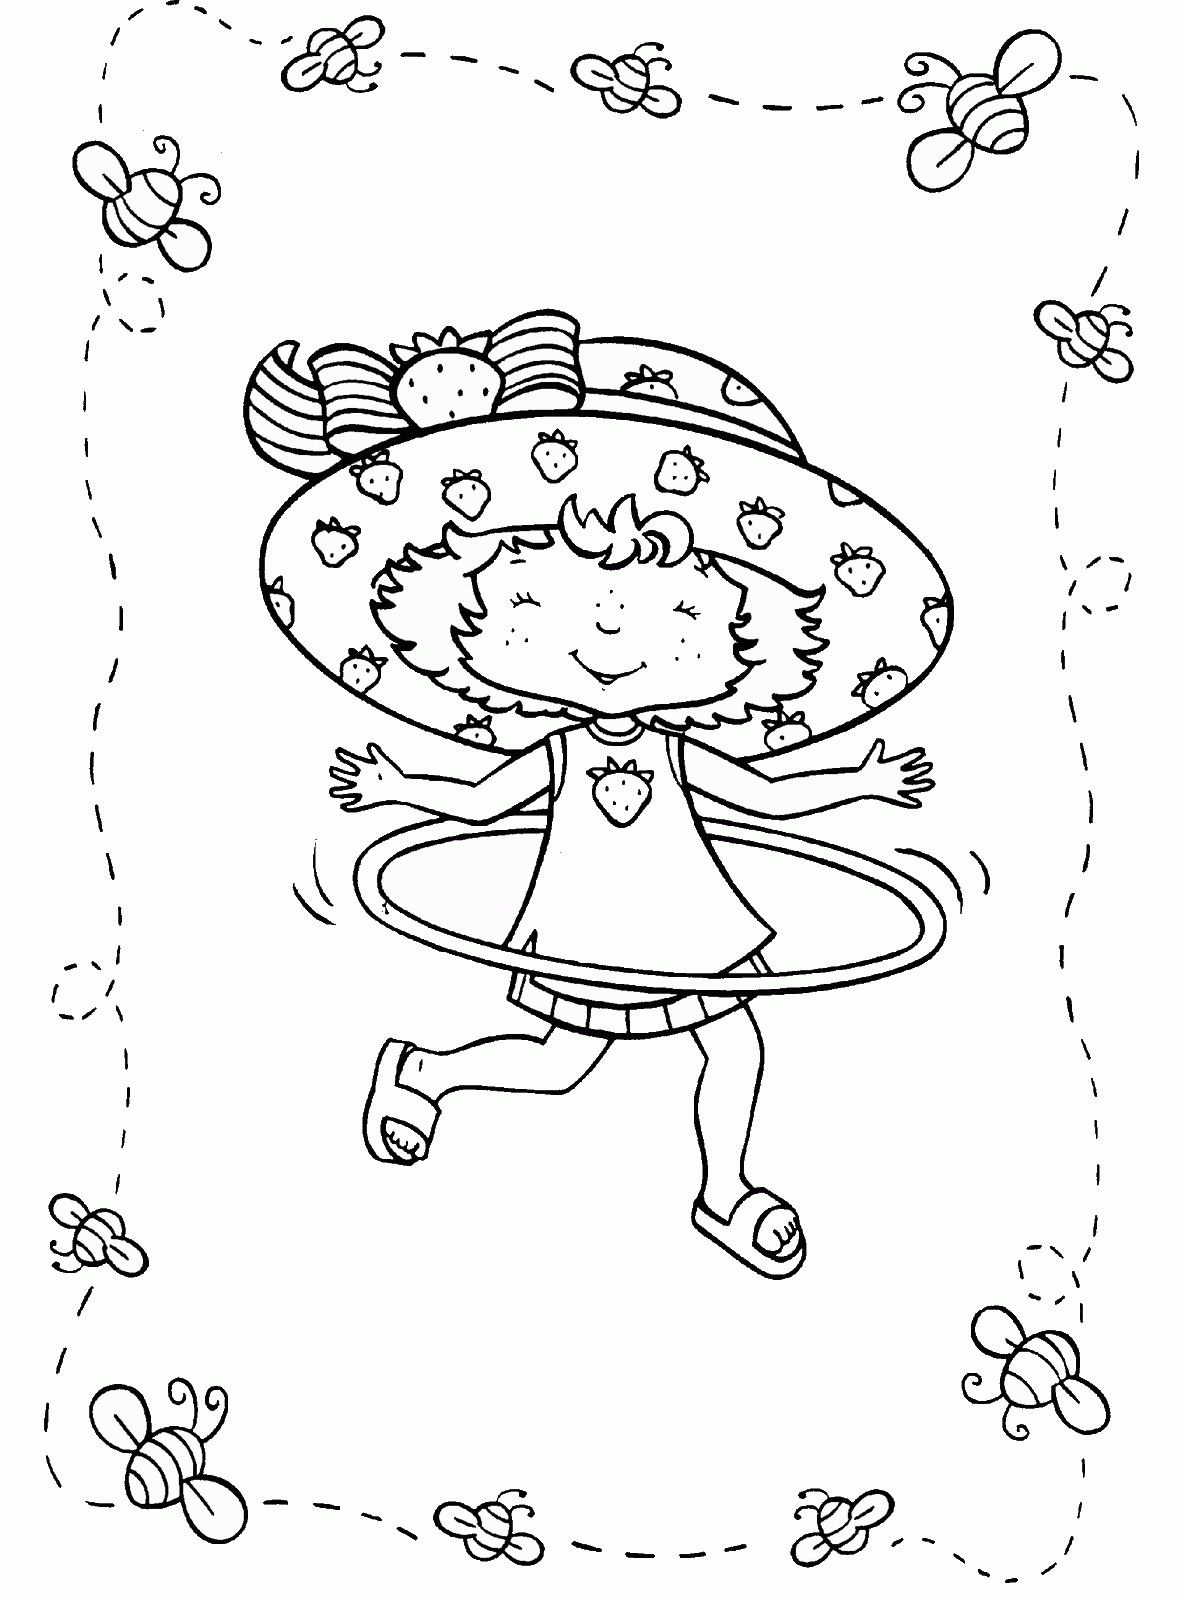 Strawberry Shortcake Coloring Pages TV Film Printable 2020 08130 Coloring4free